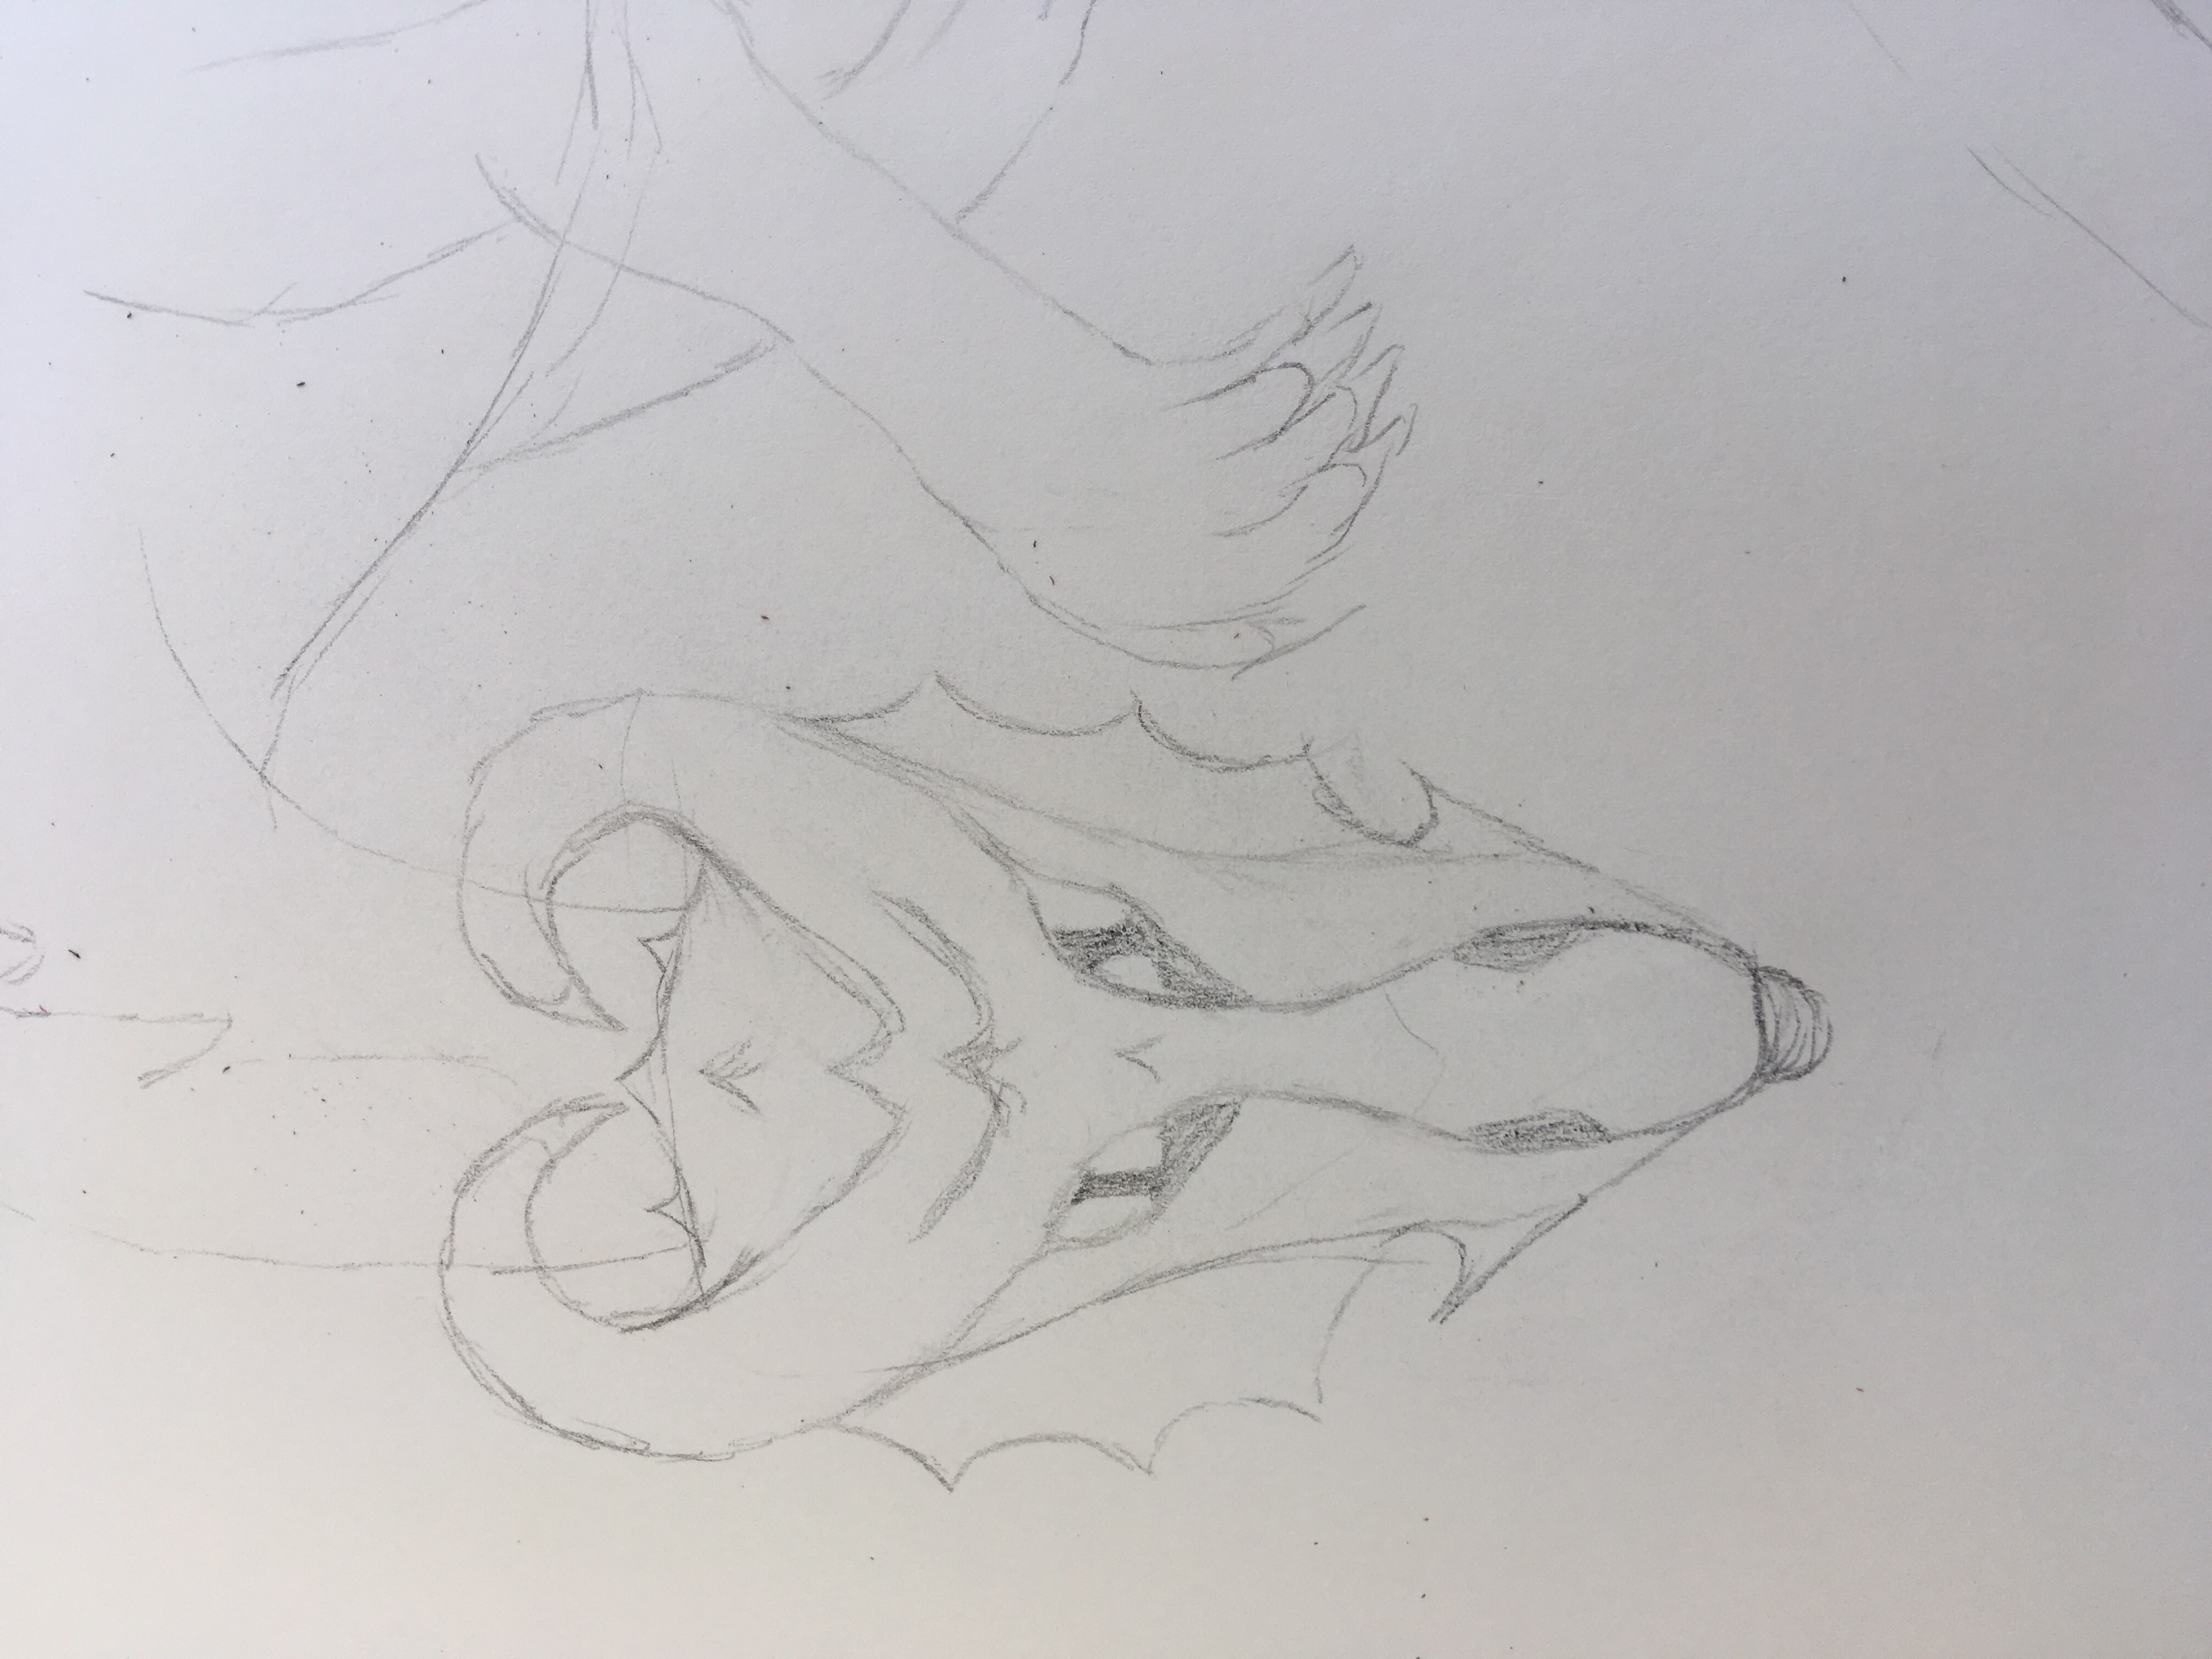 Pencil sketch of dragon with tongue possibly sticking out